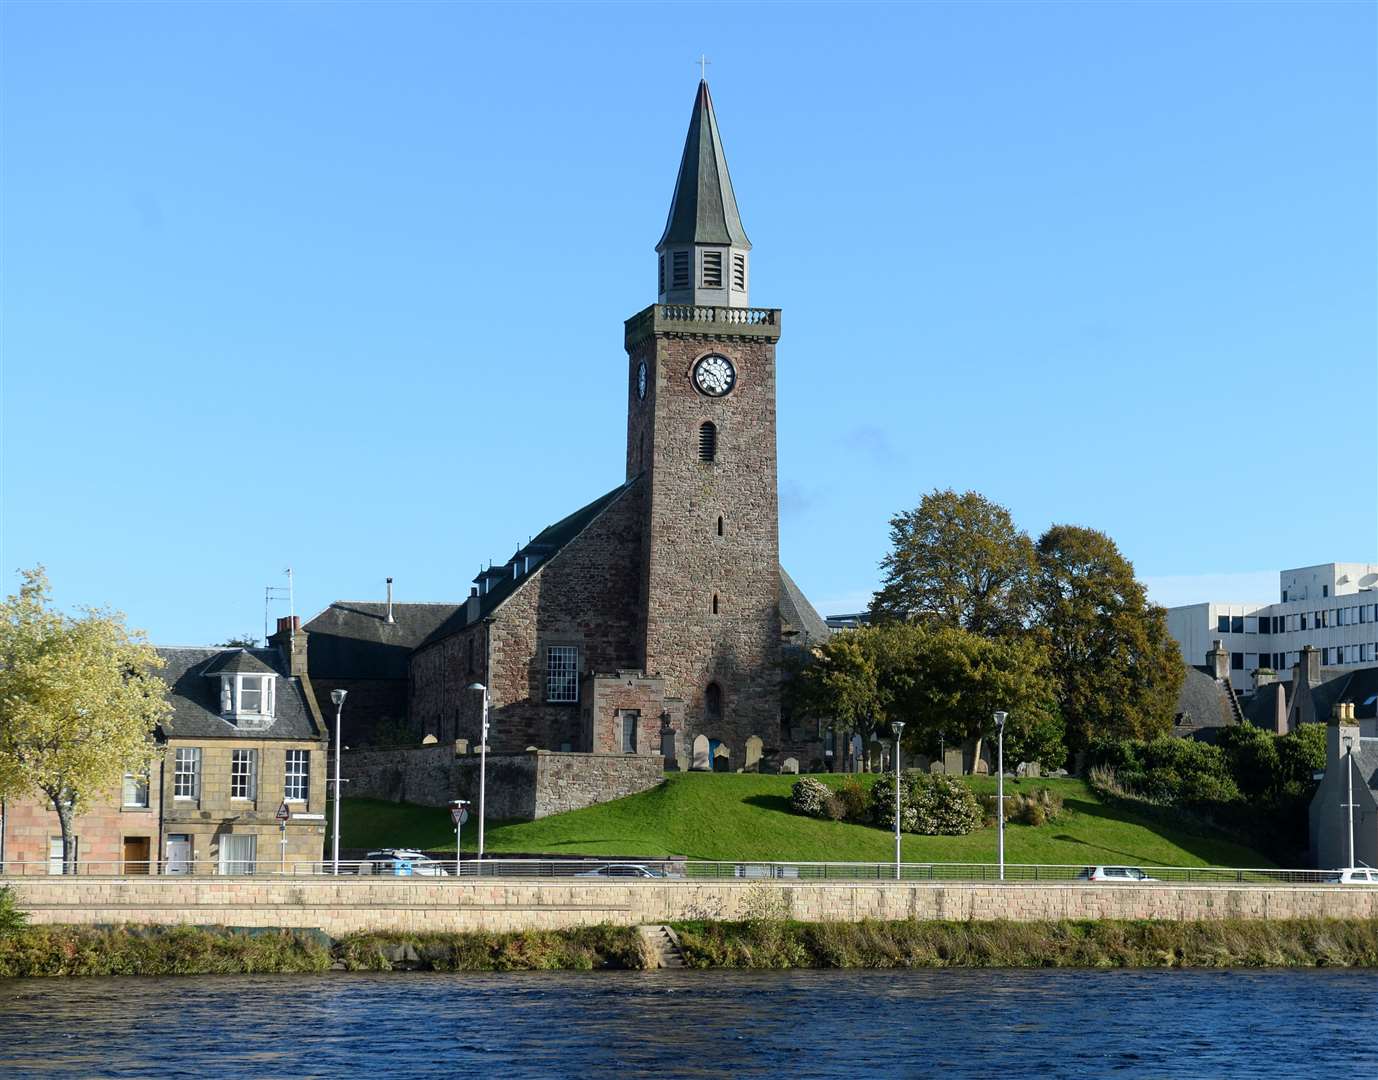 The Old High Church by the banks of the River Ness in Inverness has been a place of worship for generations.